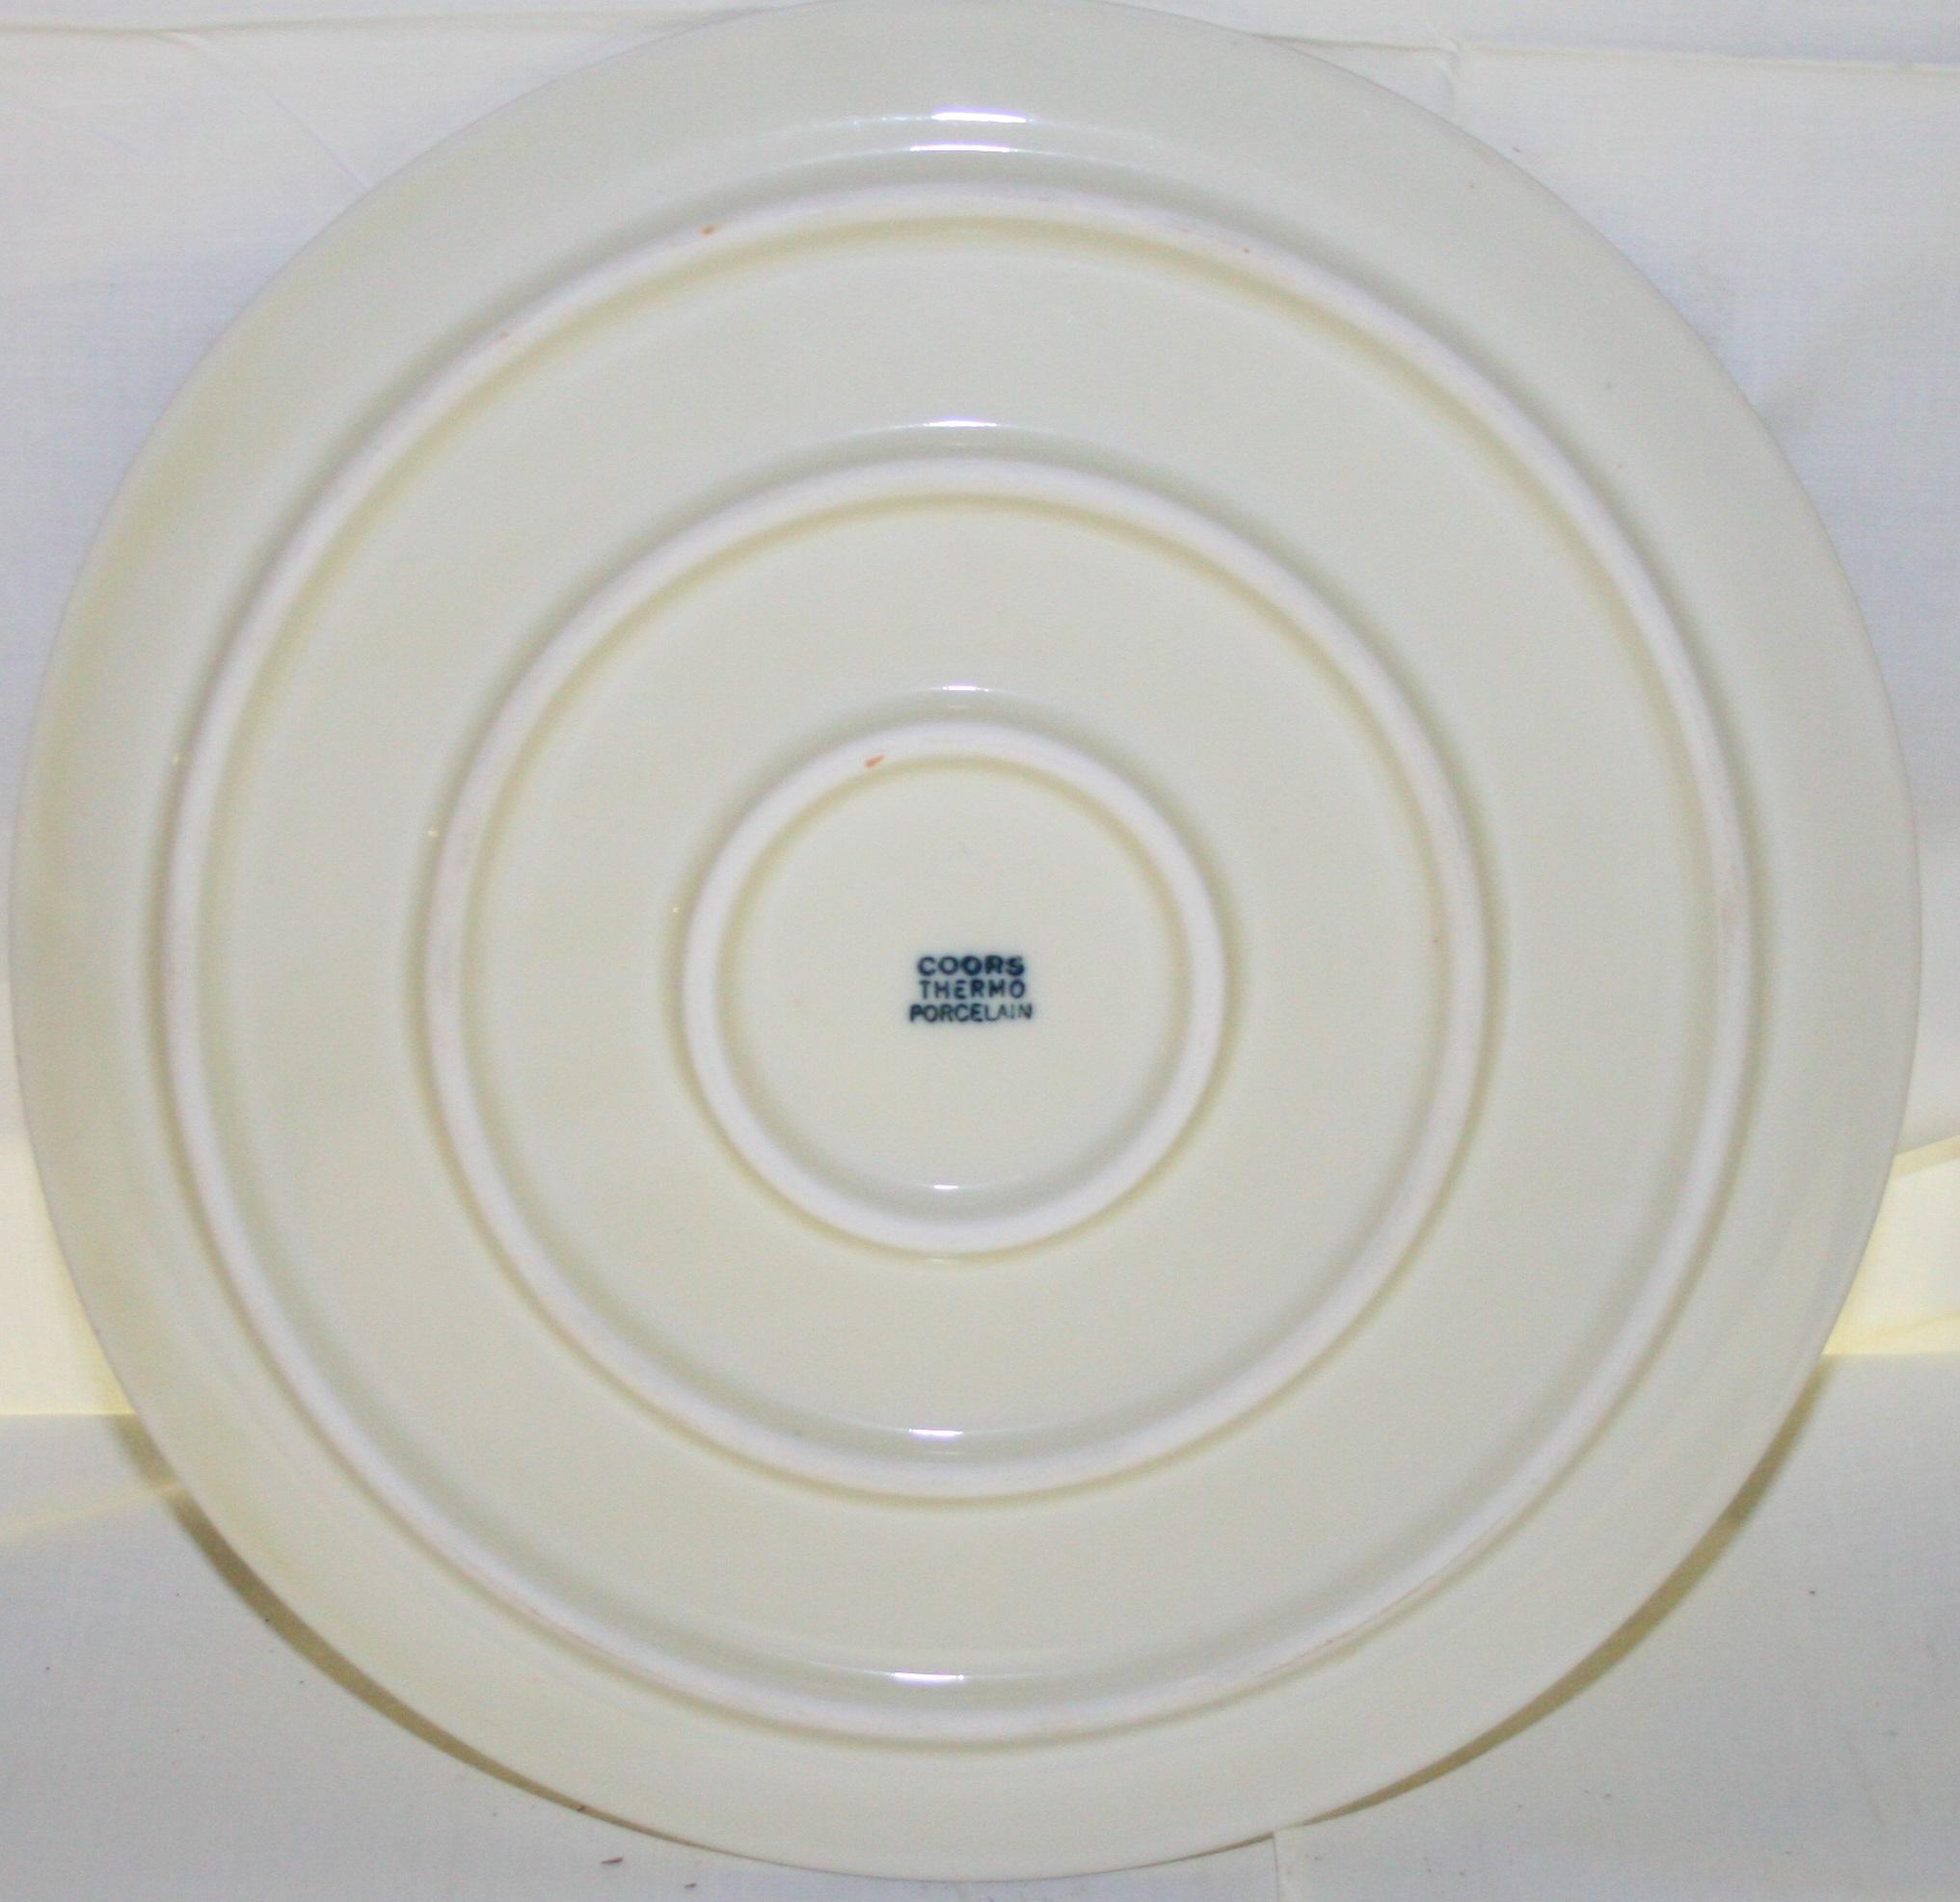 COORS THERMO PORCELAIN FLAT CAKE PLATE